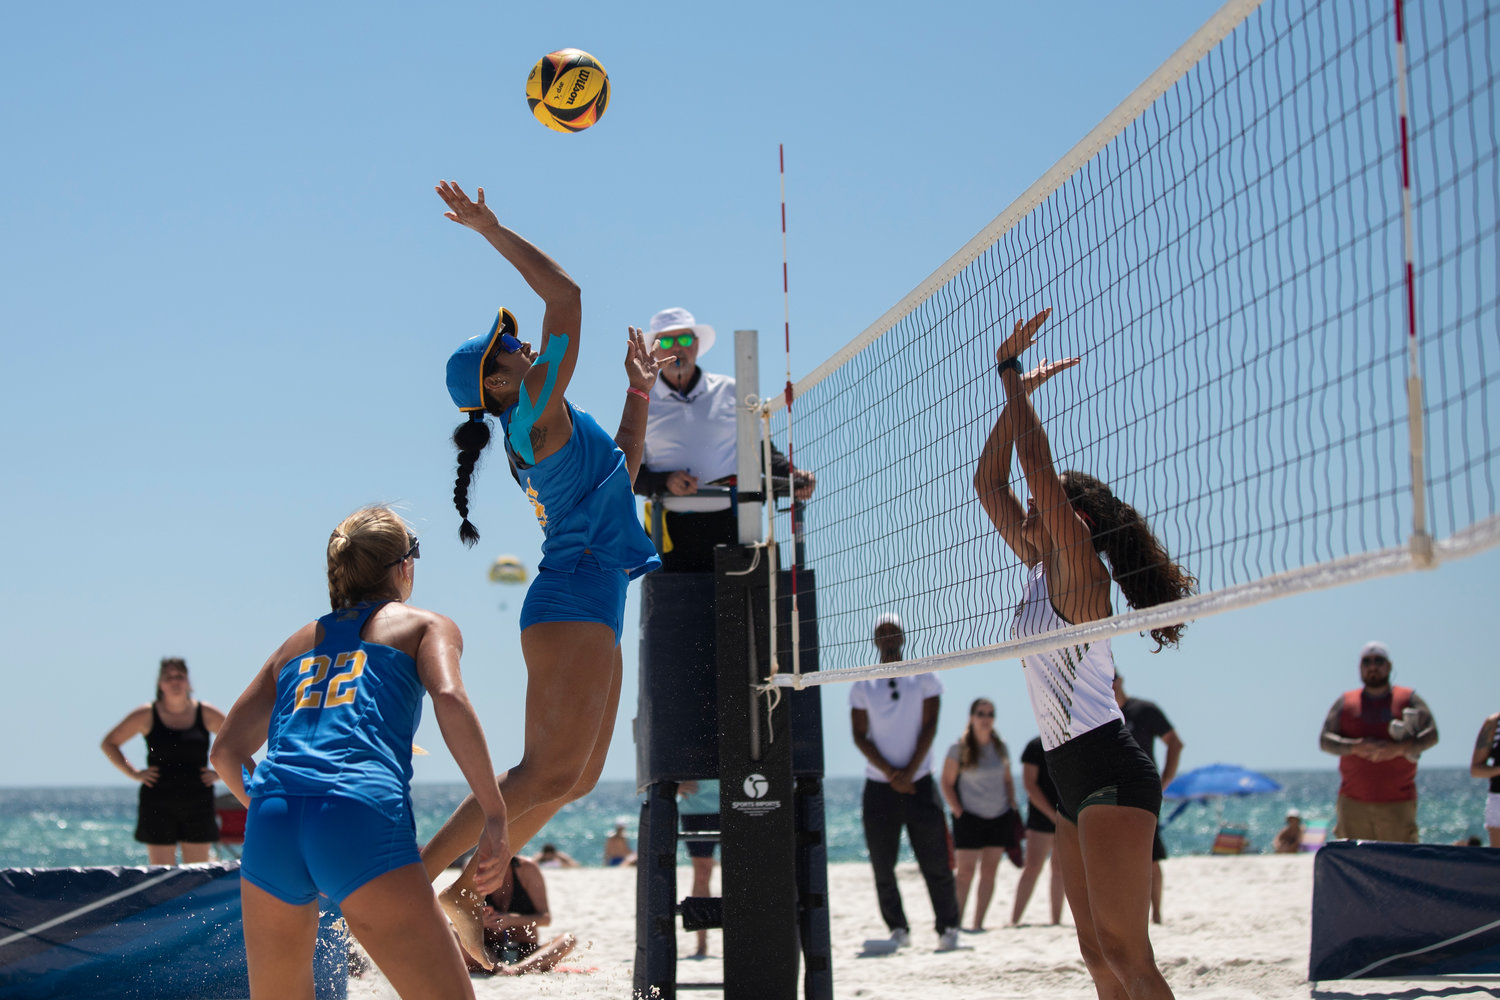 The UCLA Bruins compete in their March to May match against the host UAB Blazers March 20, 2022. Currently ranked No. 3 in the nation, UCLA will be joined by six other top-20 teams returning to Gulf Shores this weekend for the fifth annual spring break tournament at Gulf Place Beach.